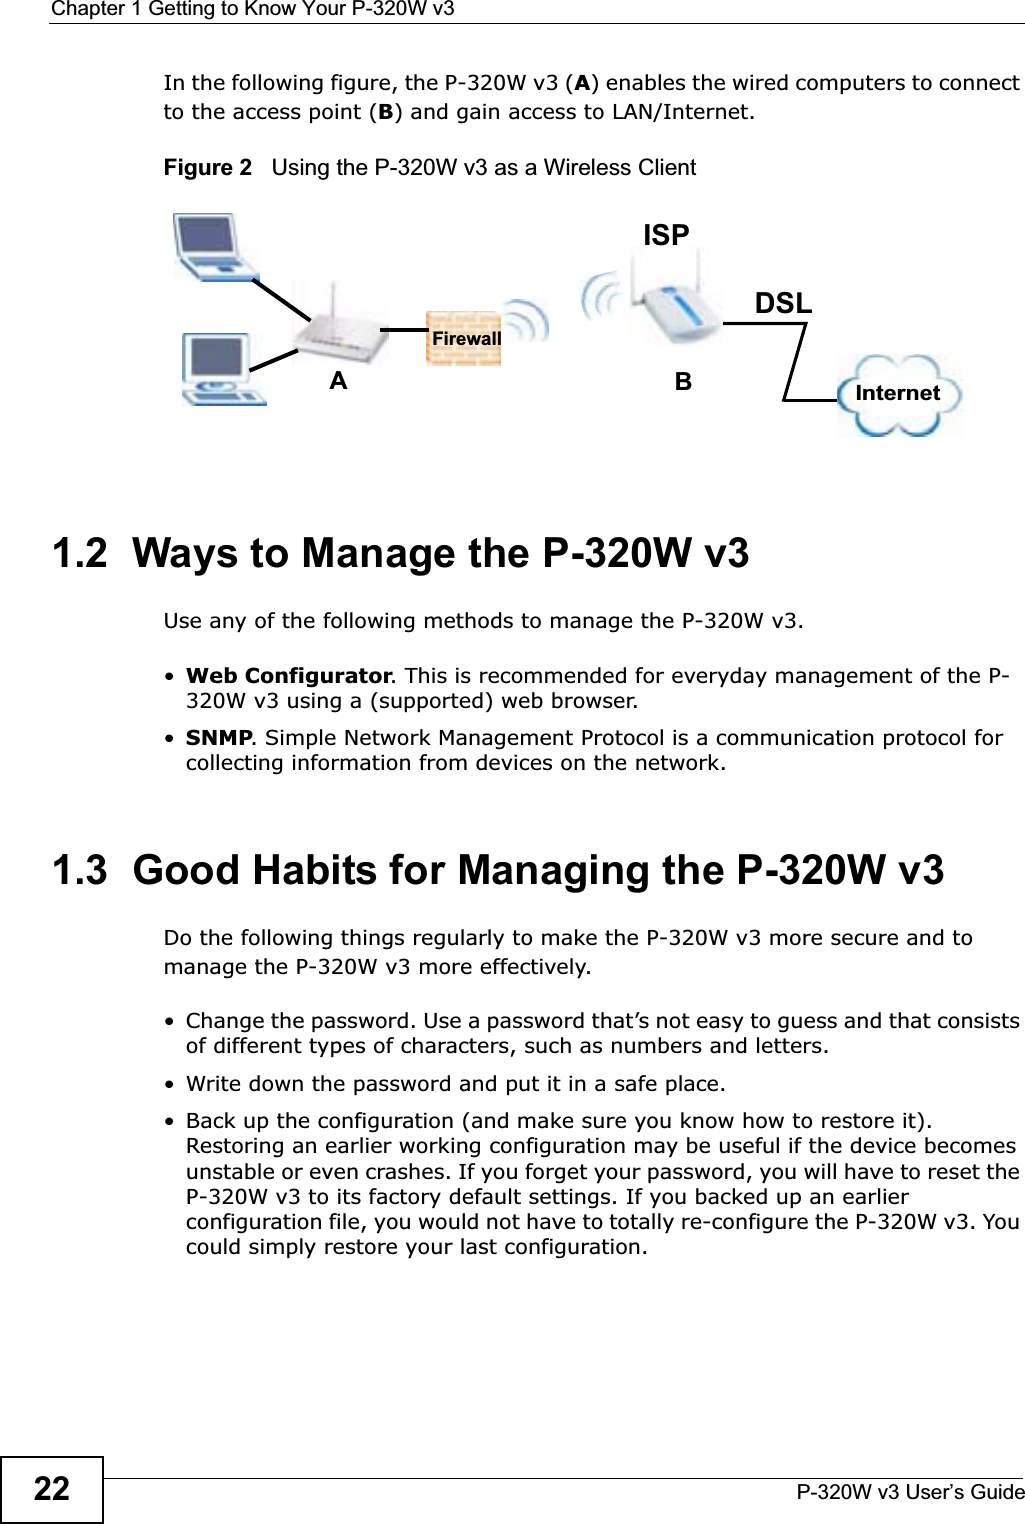 Chapter 1 Getting to Know Your P-320W v3P-320W v3 User’s Guide22In the following figure, the P-320W v3 (A) enables the wired computers to connect to the access point (B) and gain access to LAN/Internet.Figure 2   Using the P-320W v3 as a Wireless Client1.2  Ways to Manage the P-320W v3Use any of the following methods to manage the P-320W v3.•Web Configurator. This is recommended for everyday management of the P-320W v3 using a (supported) web browser. •SNMP. Simple Network Management Protocol is a communication protocol for collecting information from devices on the network.1.3  Good Habits for Managing the P-320W v3Do the following things regularly to make the P-320W v3 more secure and to manage the P-320W v3 more effectively.• Change the password. Use a password that’s not easy to guess and that consists of different types of characters, such as numbers and letters.• Write down the password and put it in a safe place.• Back up the configuration (and make sure you know how to restore it). Restoring an earlier working configuration may be useful if the device becomes unstable or even crashes. If you forget your password, you will have to reset the P-320W v3 to its factory default settings. If you backed up an earlier configuration file, you would not have to totally re-configure the P-320W v3. You could simply restore your last configuration.ABInternetDSLFirewallISP